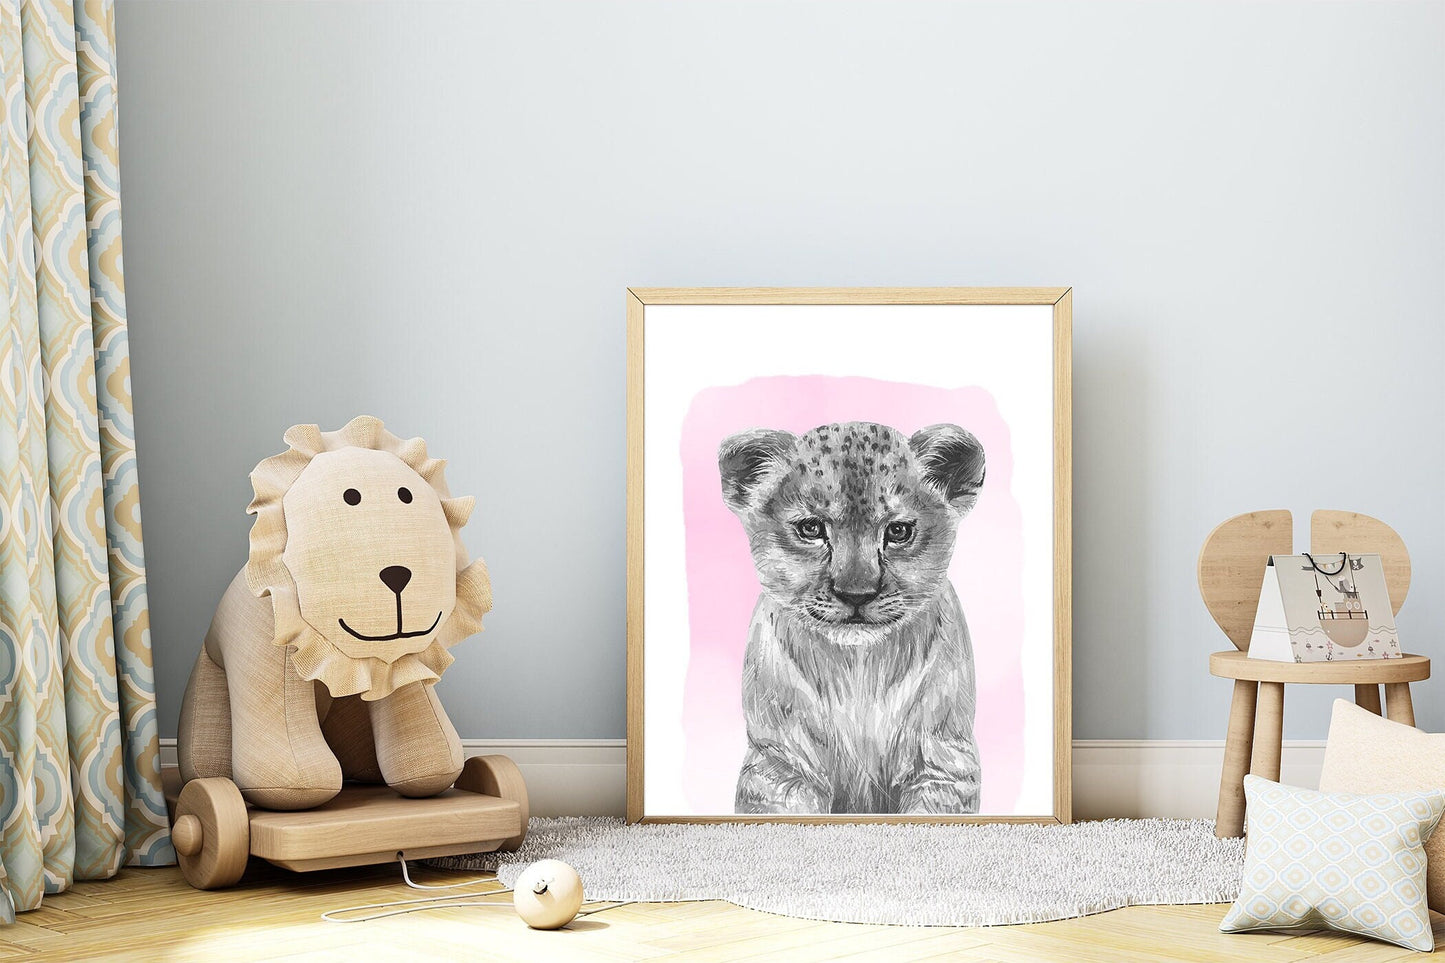 Black and white safari prints | Set of 3 baby animal portraits | Choose your own images and initial | A3 | Square | A4 | A5